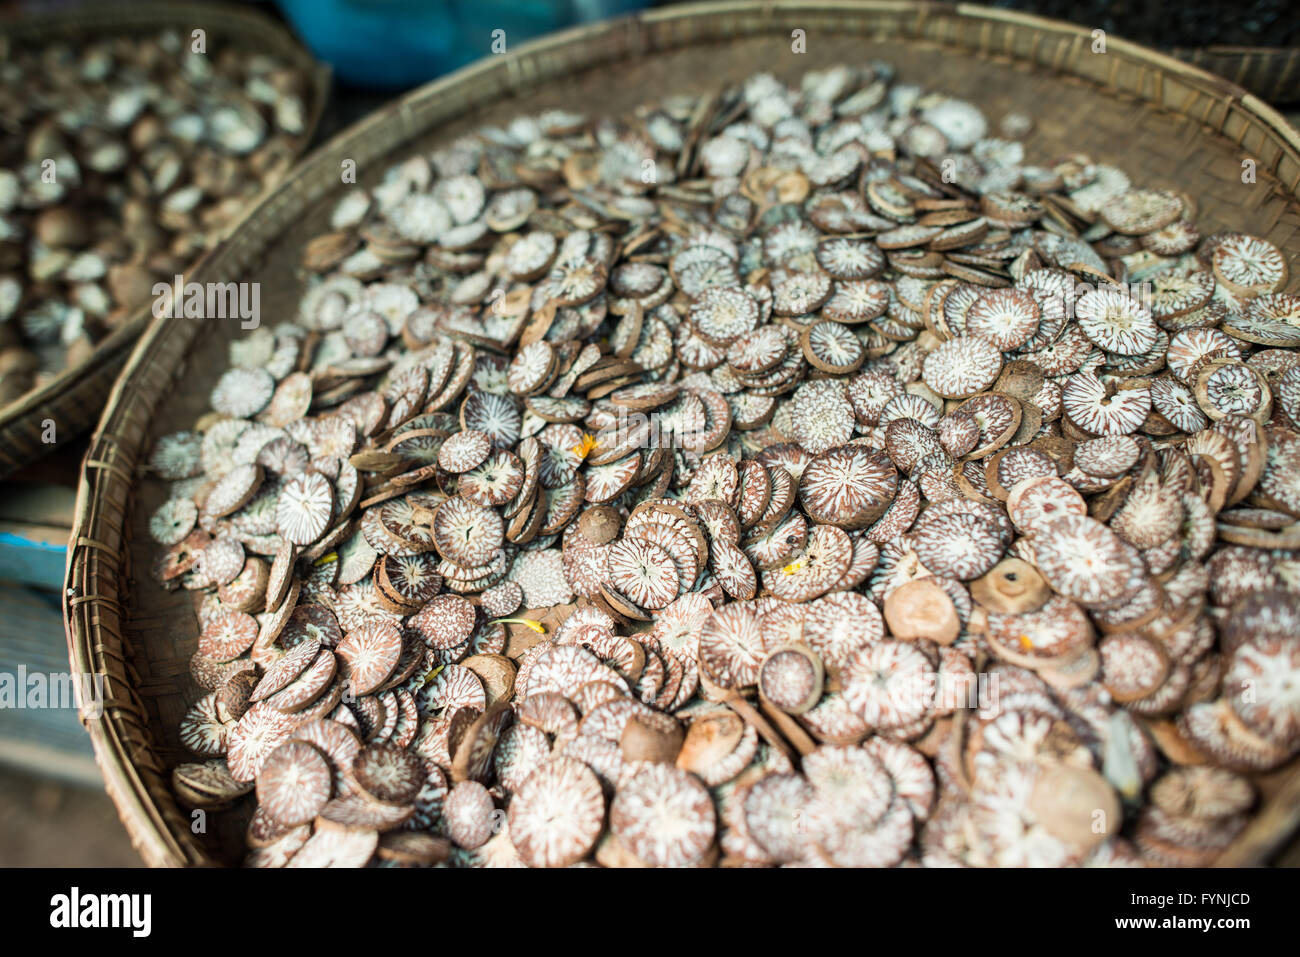 NYAUNG-U, Myanmar - Sliced betel nuts at Nyaung-U Market, near Bagan, Myanmar (Burma). The nuts are often placed in betel leaves and chewed. The market is also known as Mani Sithu Market. Stock Photo